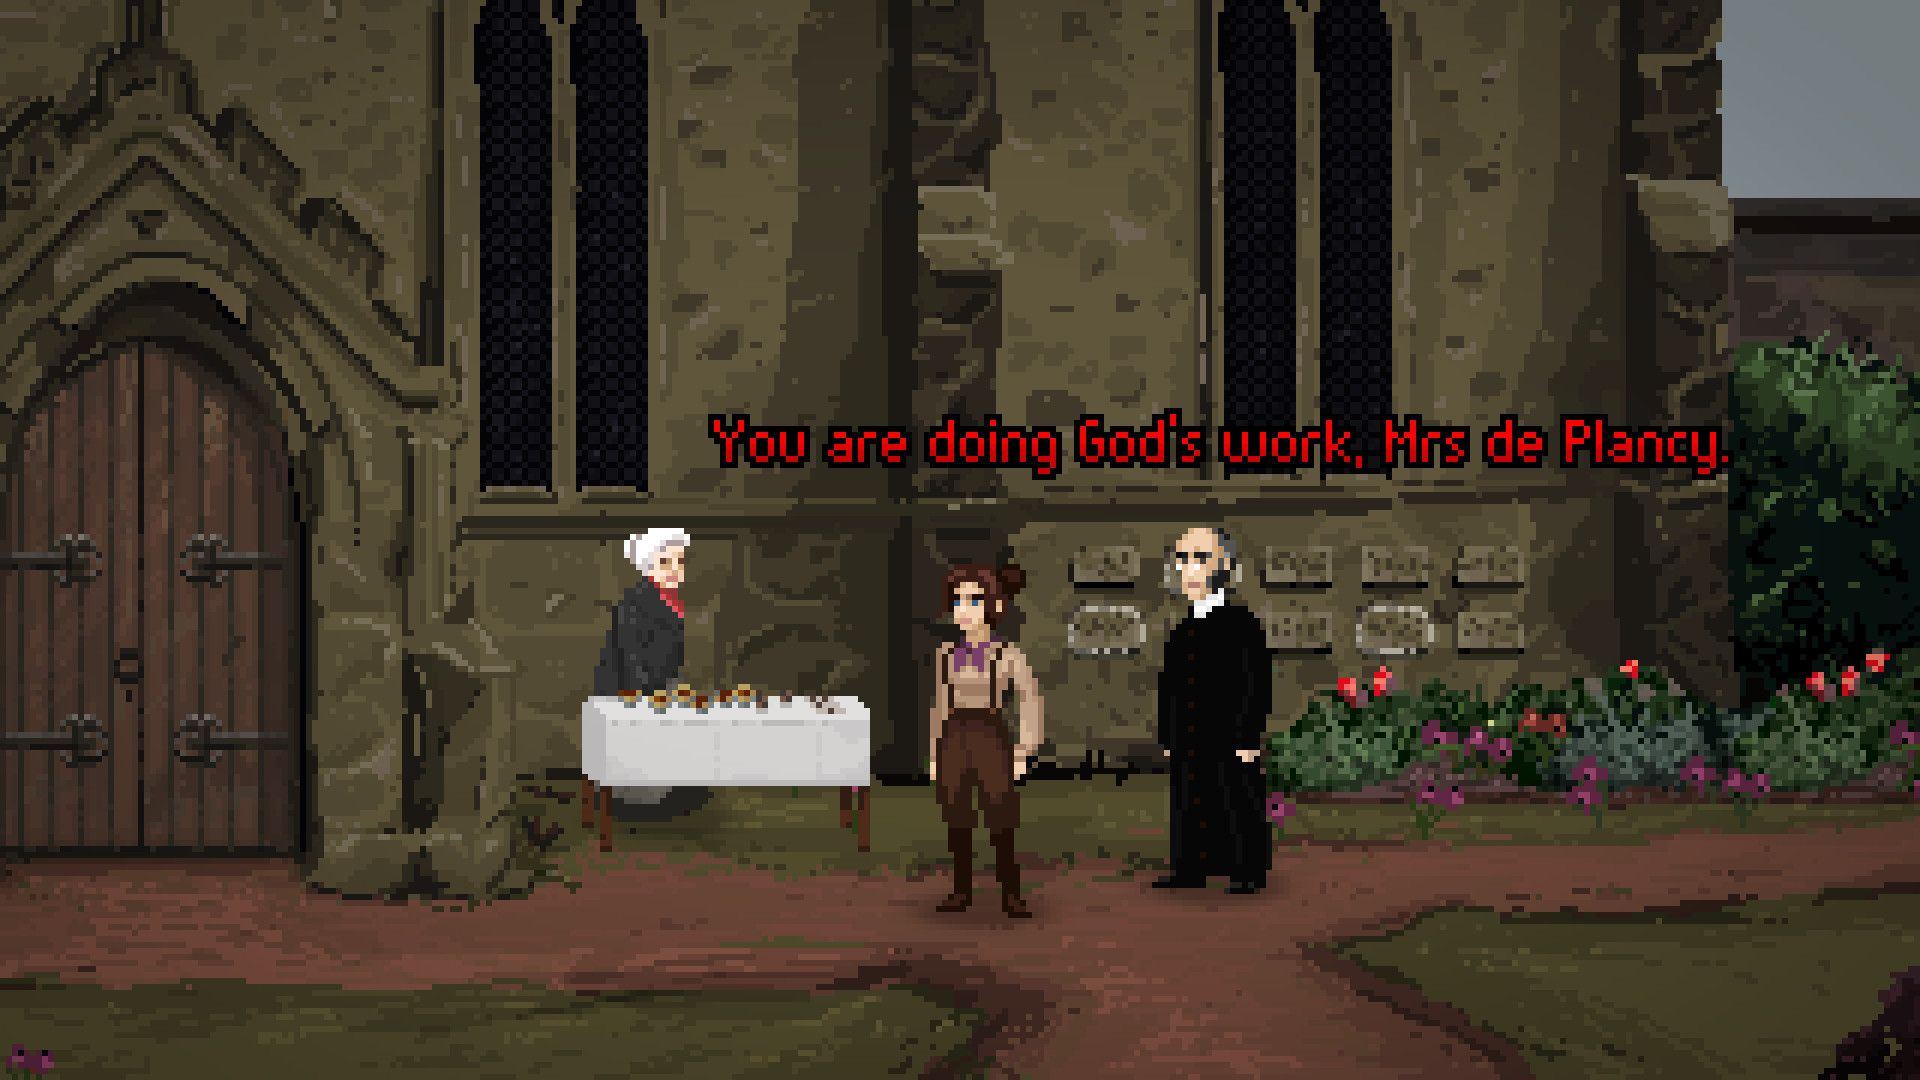 The main character in The Excavation Of Hob's Barrow, Thomasina, is standing in front of a church door with a vicar. He's saying 'You're doing God's work, Mrs de Plancy' to an older woman running a cake stall by the door